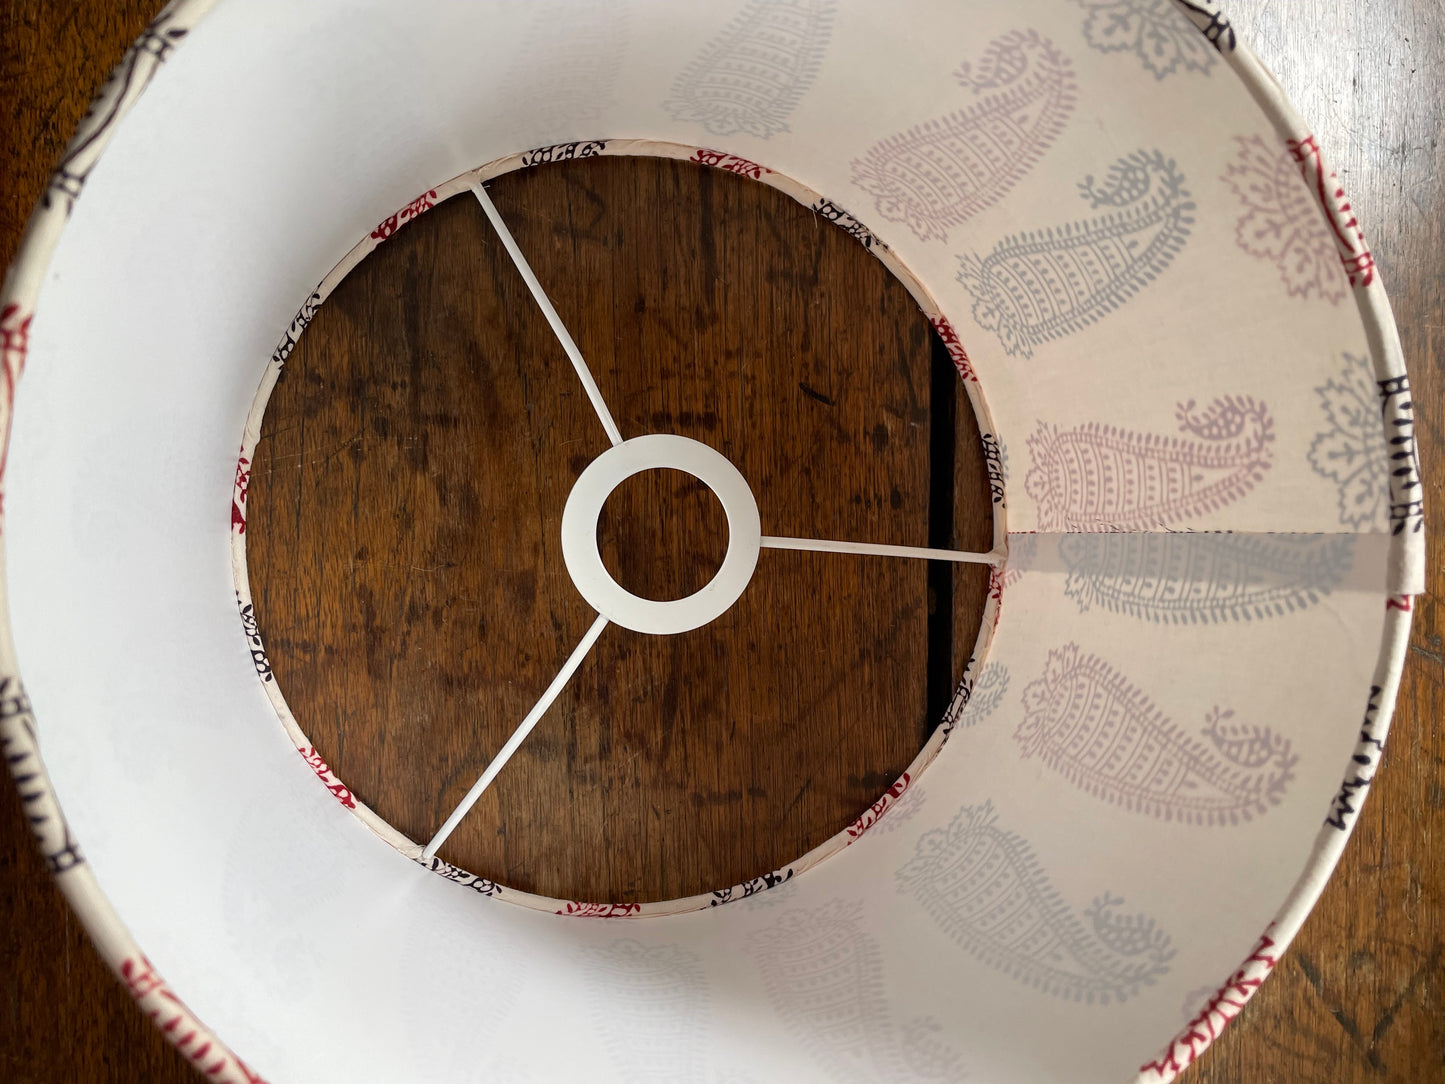 10 inch Drum Lampshade. Bagh Indian Hand Block. Ecru with Maroon and Black Elongated Buta Motif.